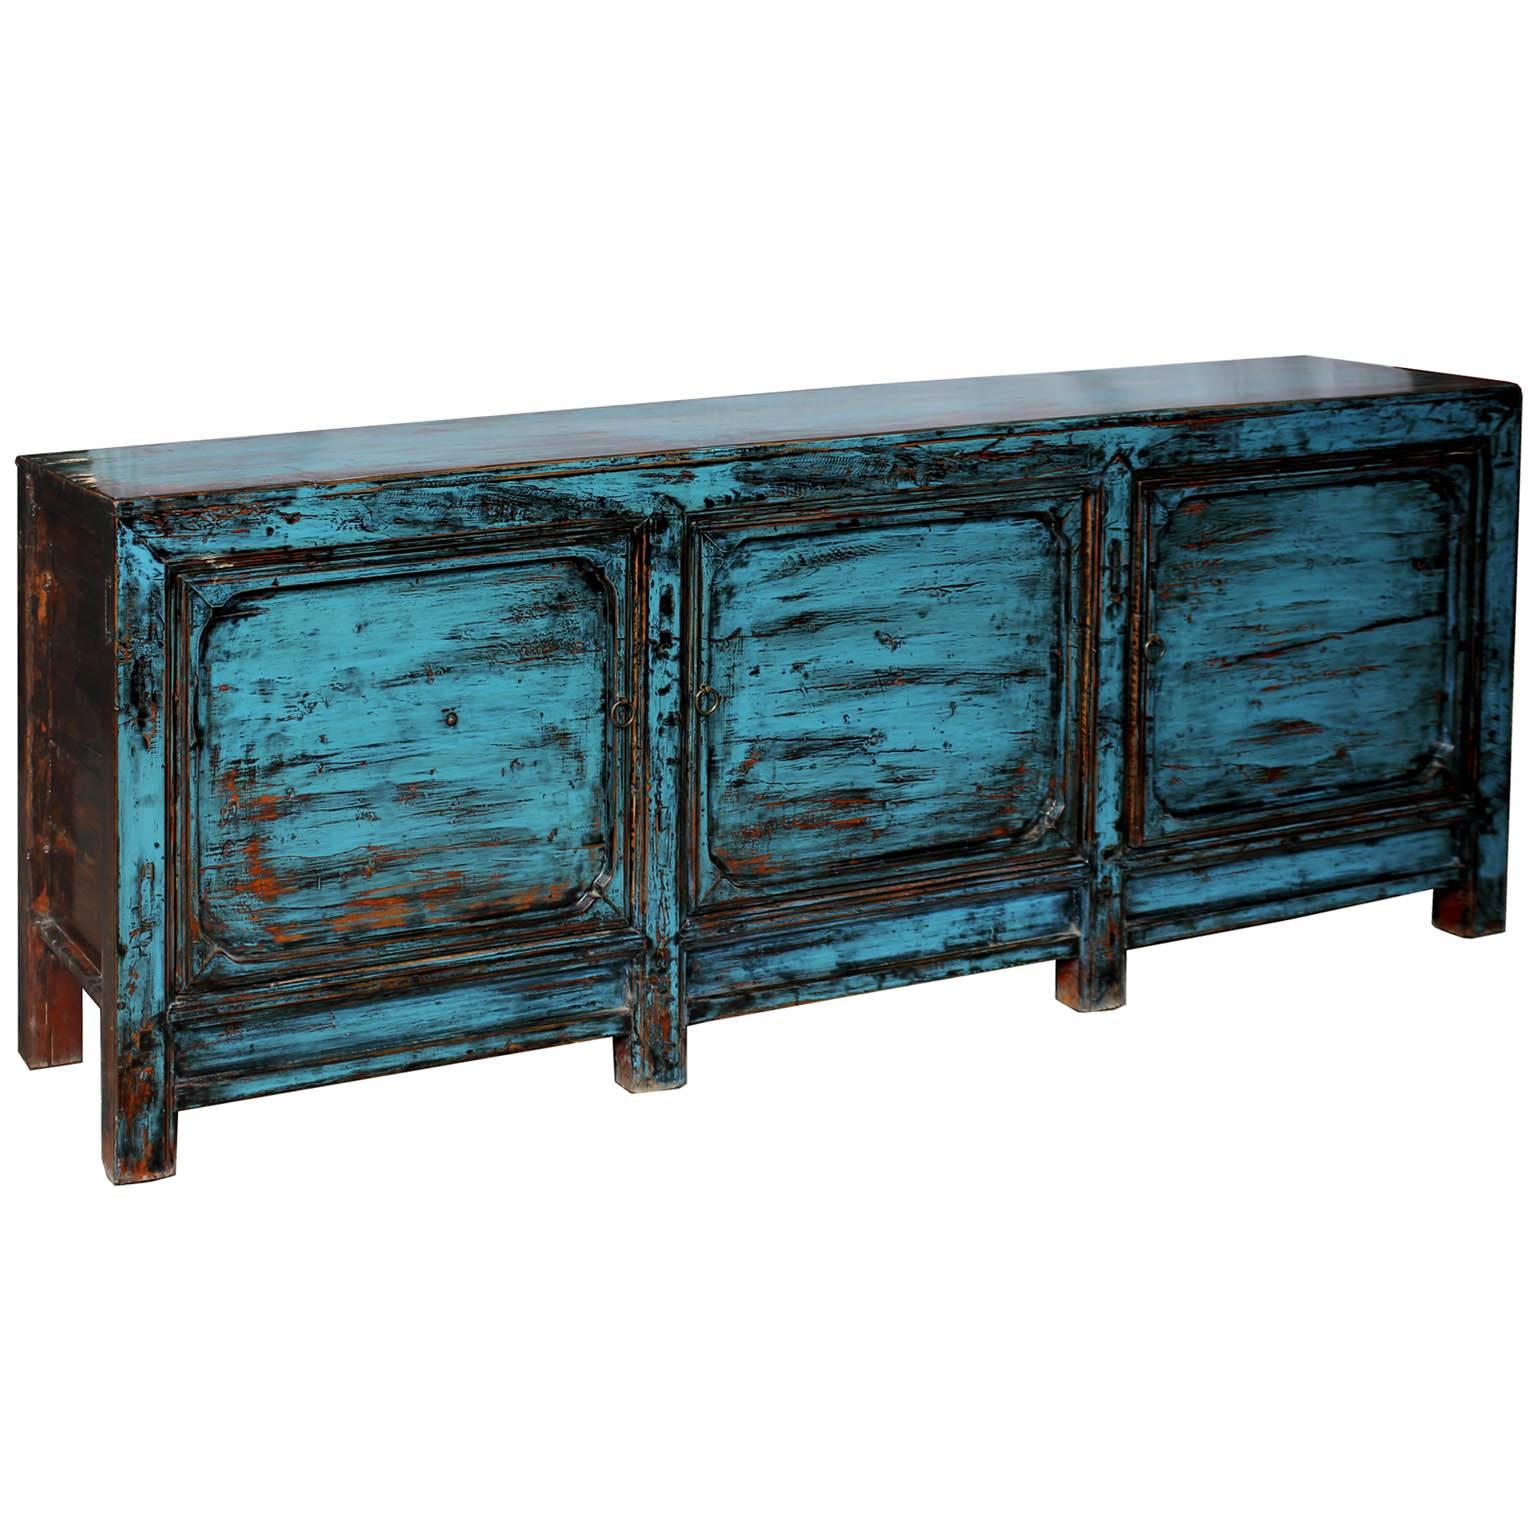 Blue lacquer sideboard features clean lines, exposed wood edges and plenty of storage. Bring color into a contemporary living space by placing beneath a flat screen tv or use as a server in the dining room. New interior shelves and hardware.